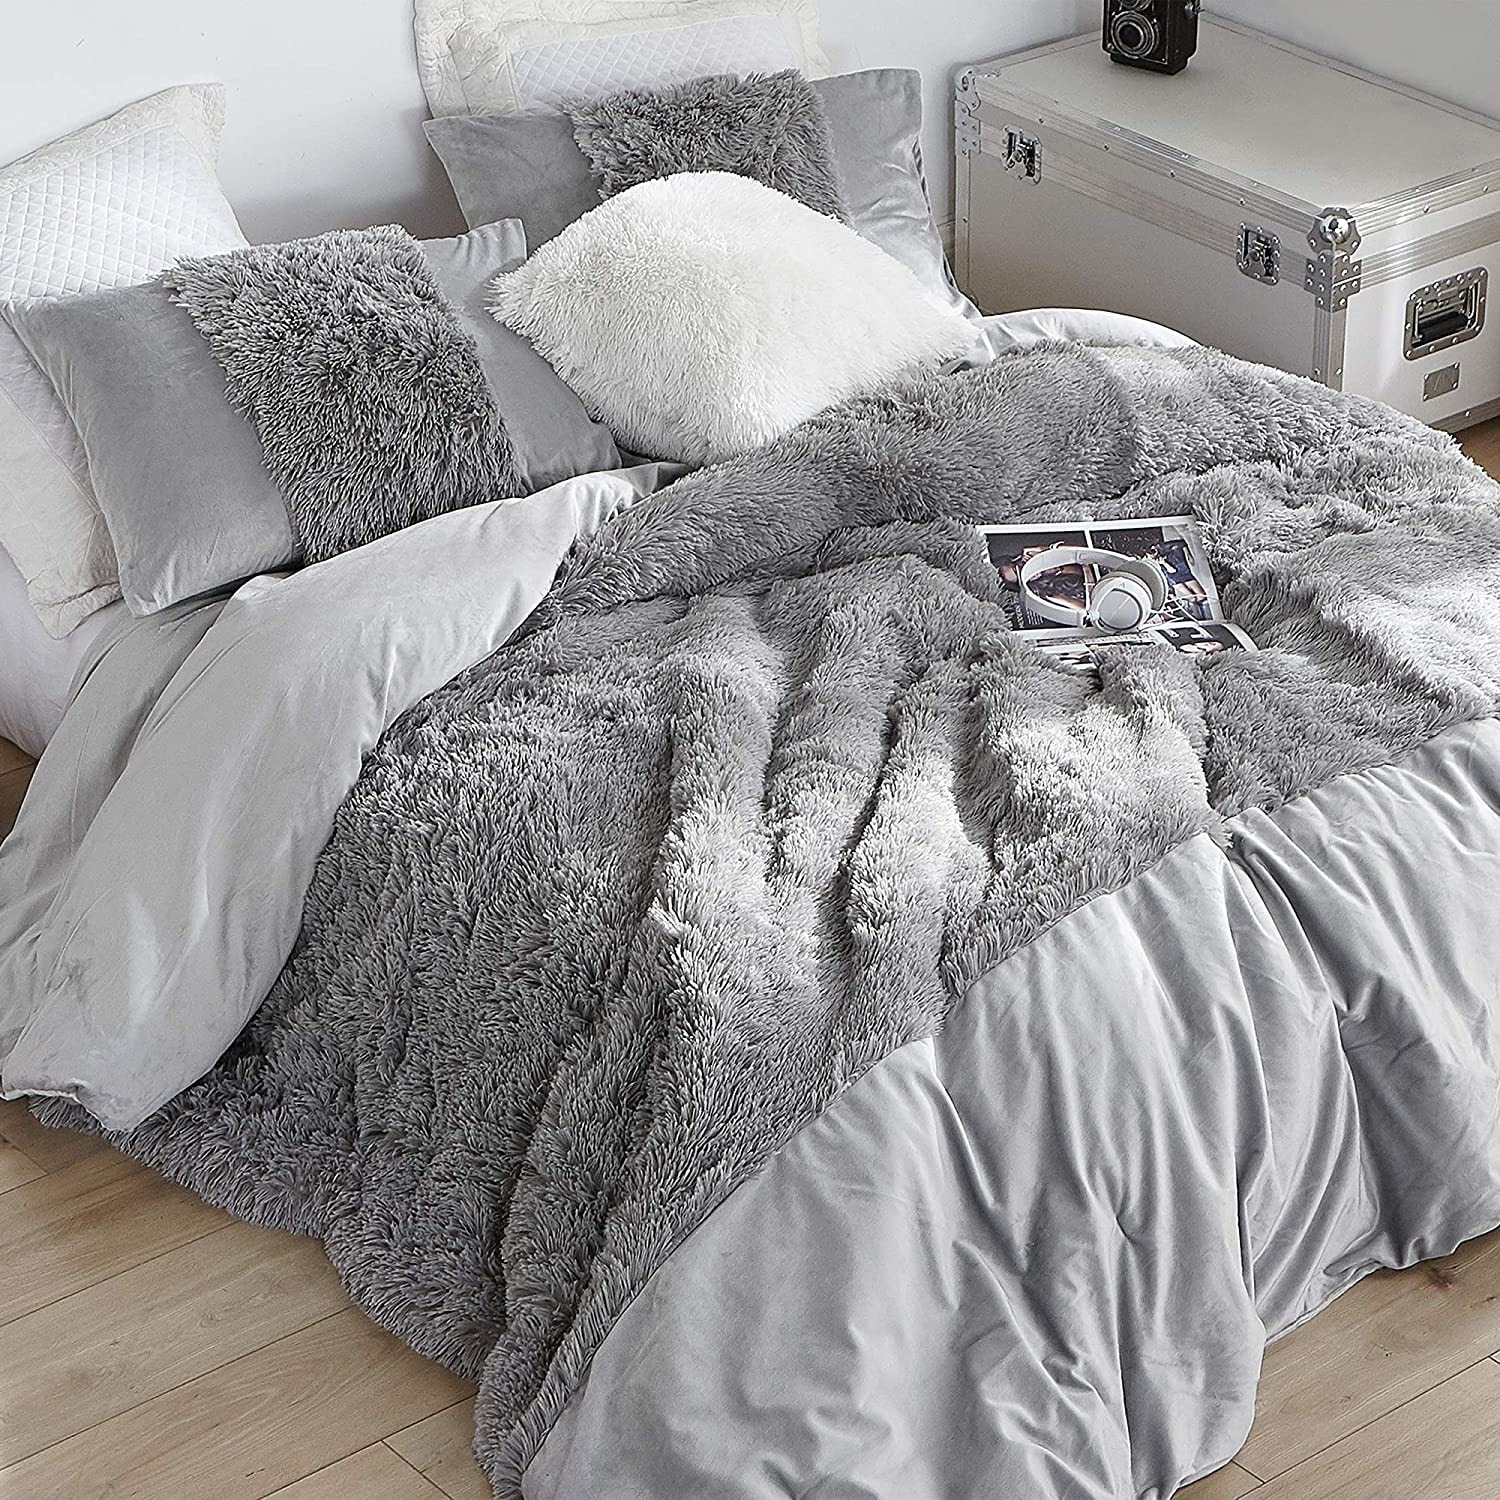 https://ak1.ostkcdn.com/images/products/is/images/direct/5b3ac9af81890339084110cee77504307b040d82/Are-You-Kidding%3F---Coma-Inducer-Oversized-Comforter---Greyness.jpg